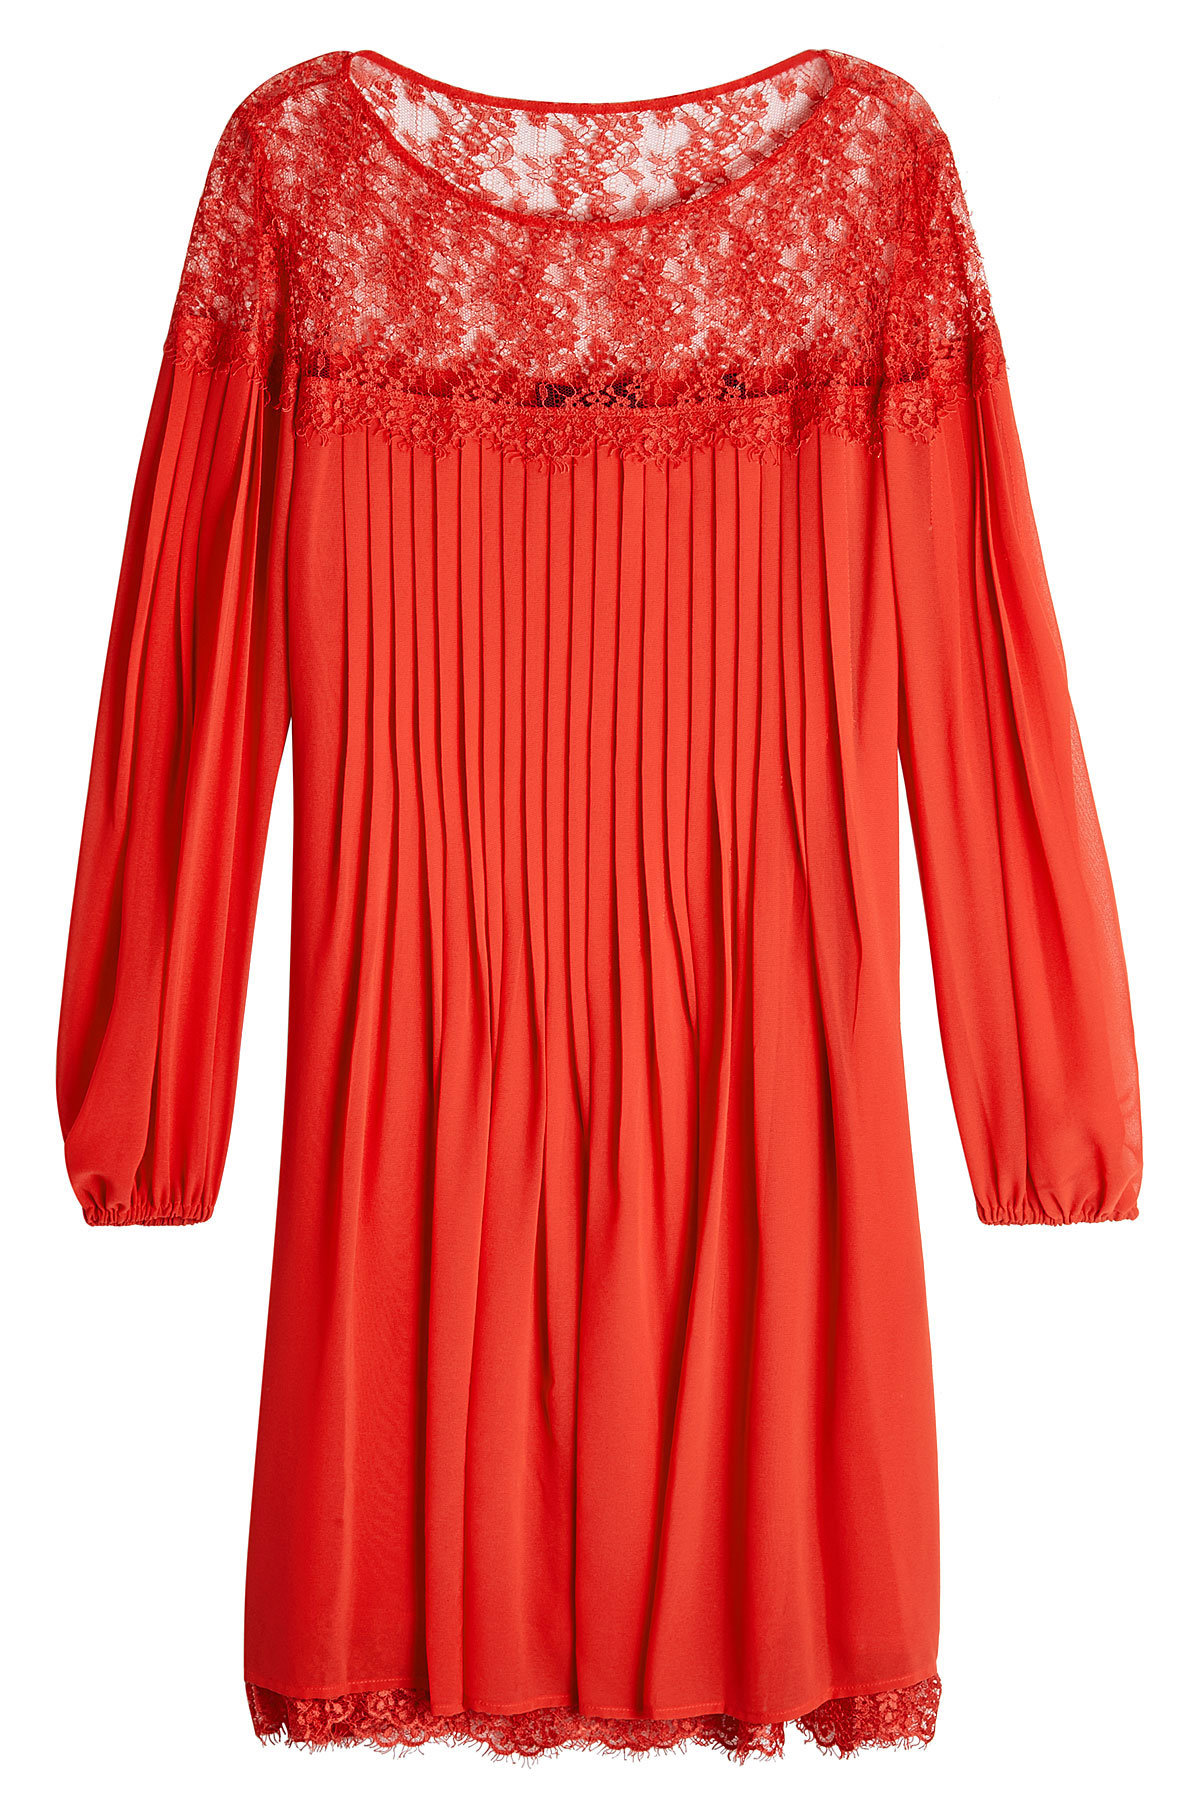 Chiffon and Lace Dress by The Kooples